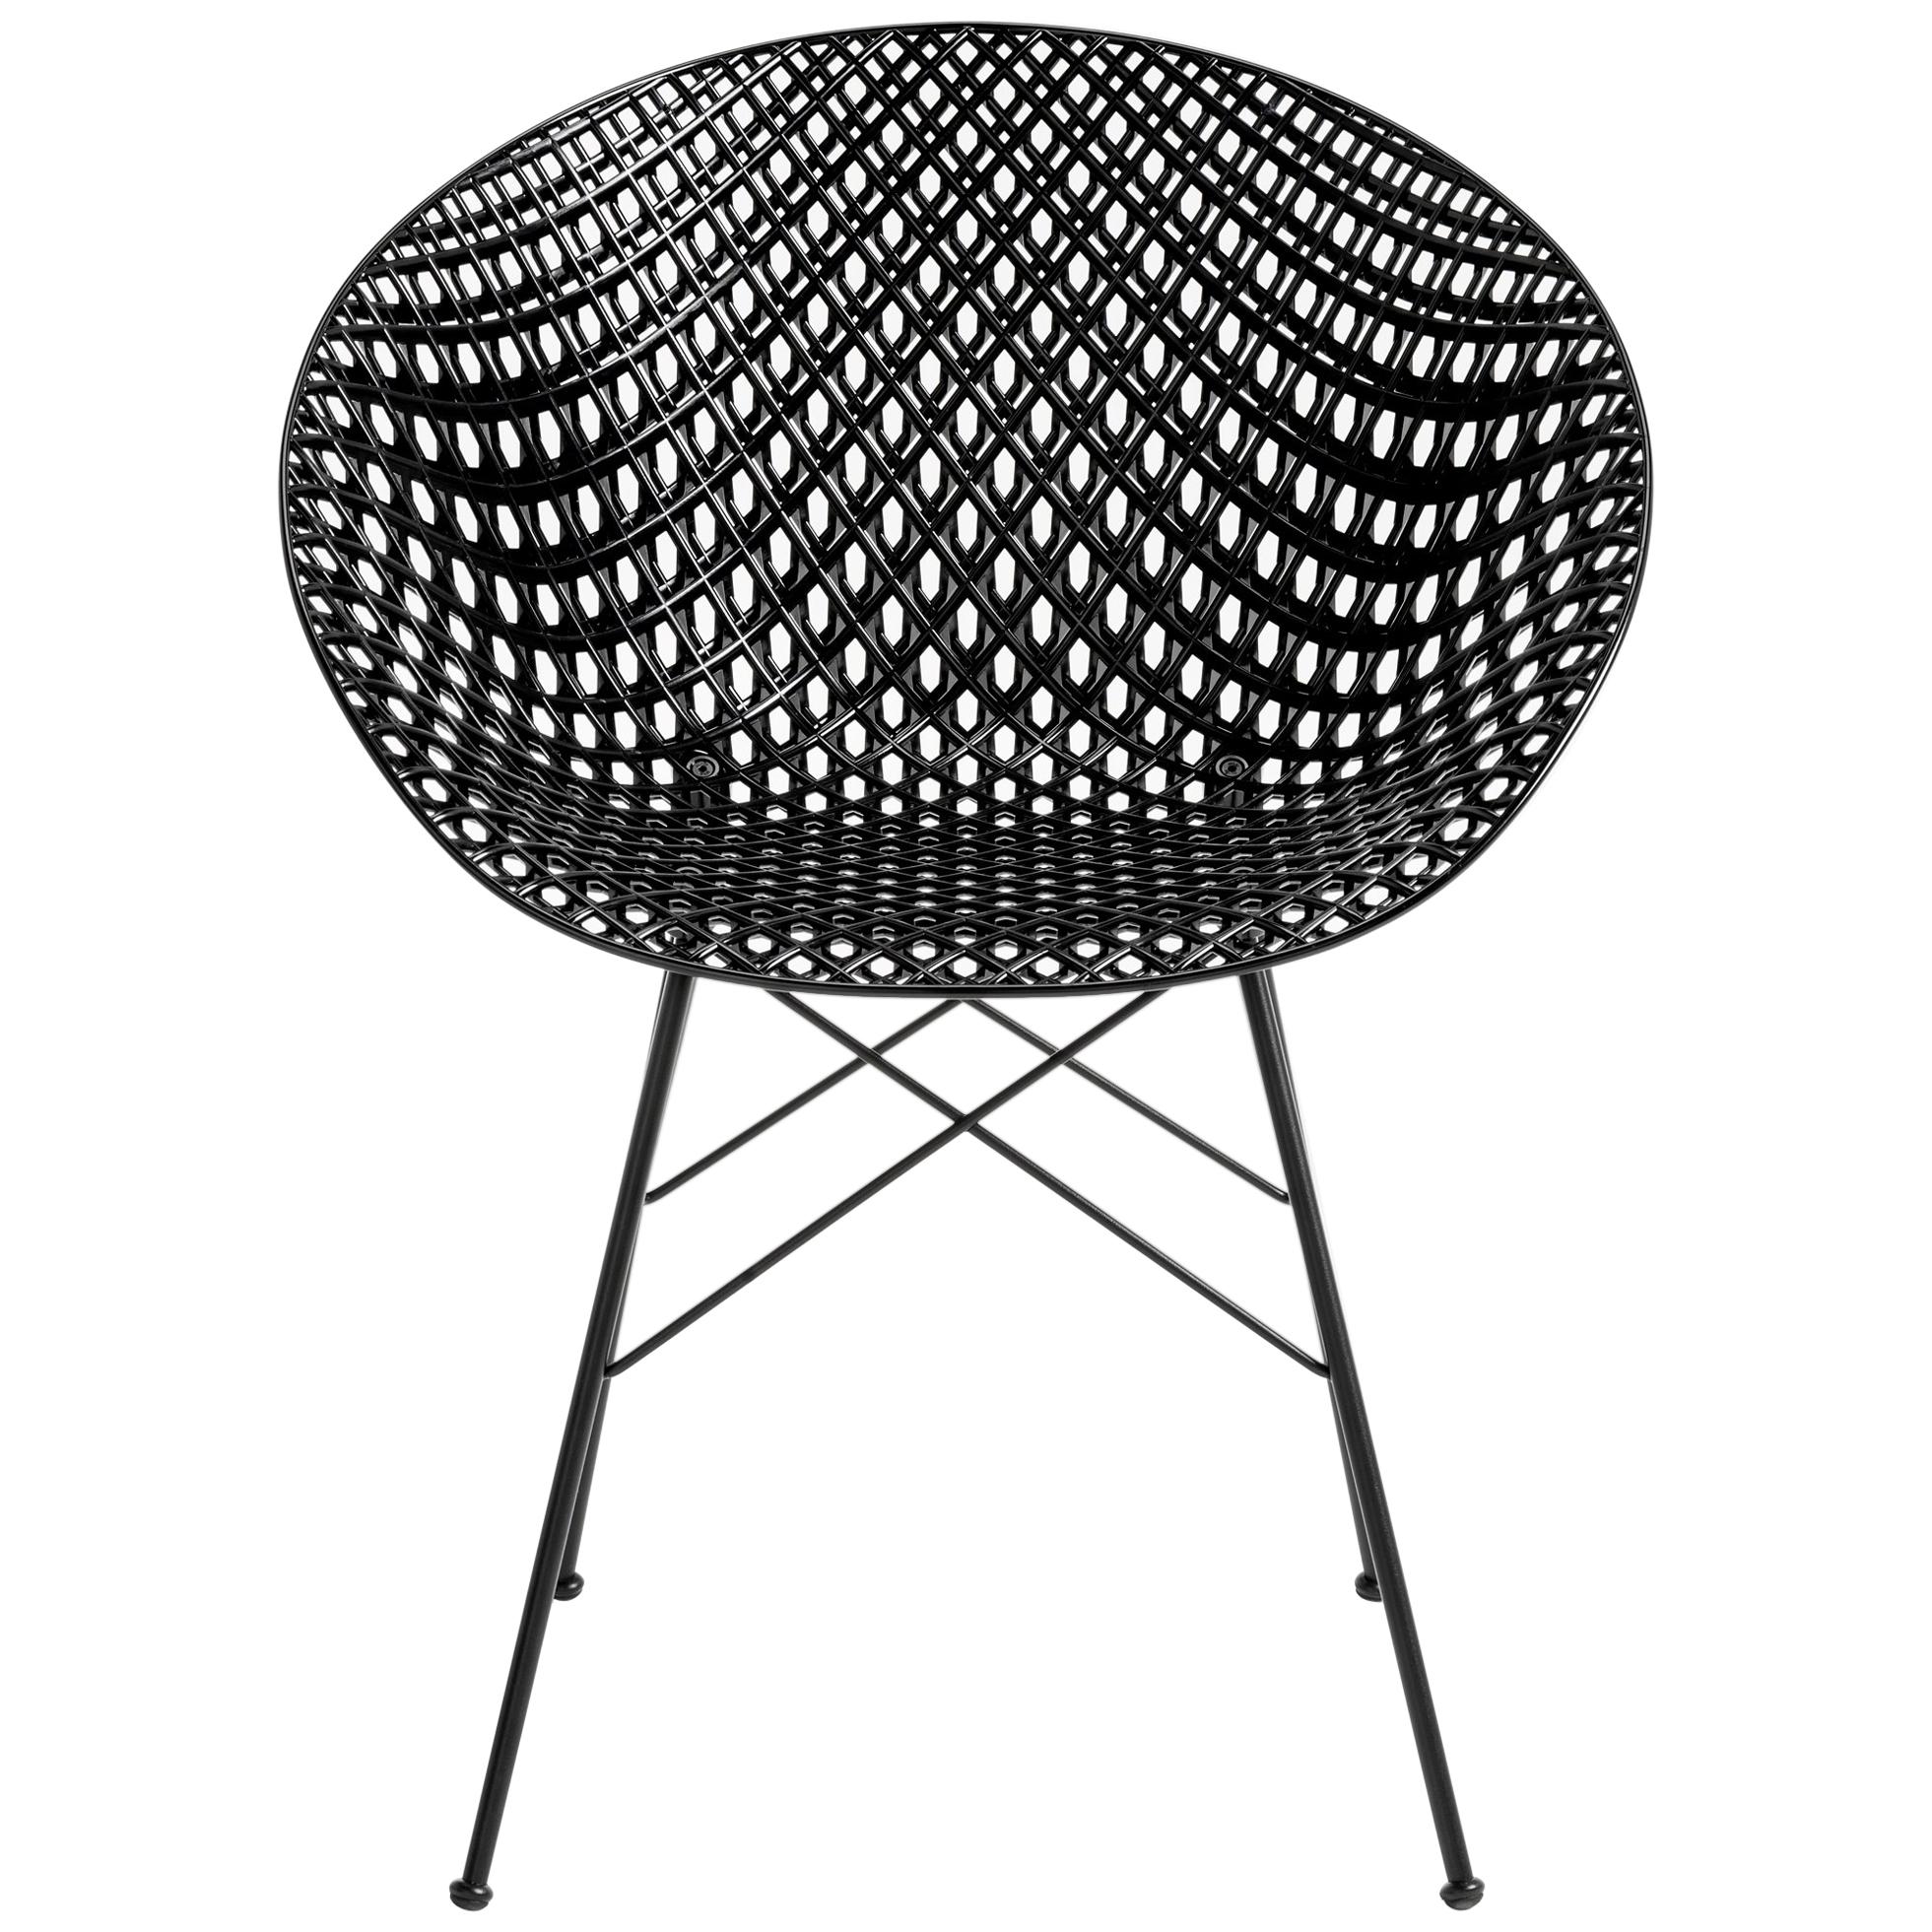 Set of 2 Kartell Smatrik Outdoor Chair in Black by Tokujin Yoshioka For Sale